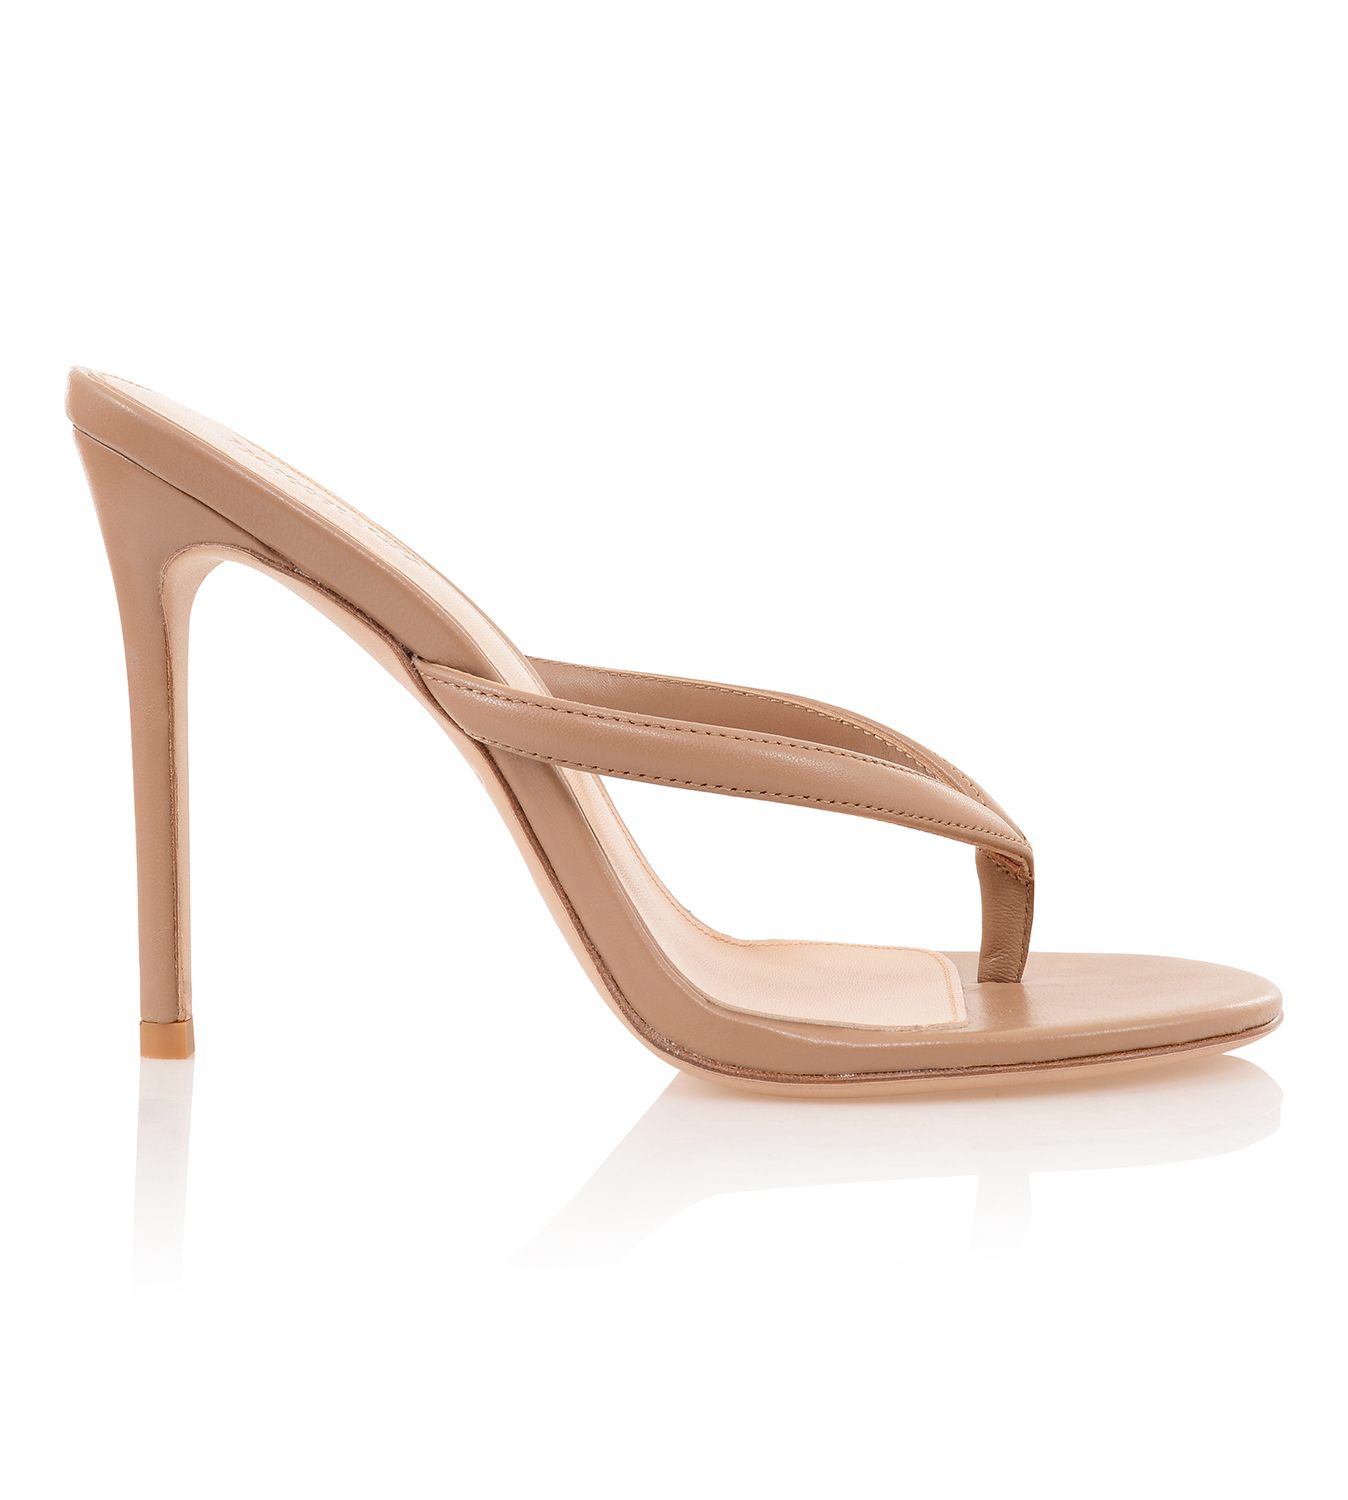 Shoes : 'Lola' Sunkissed Leather High Heel Thong Sandals